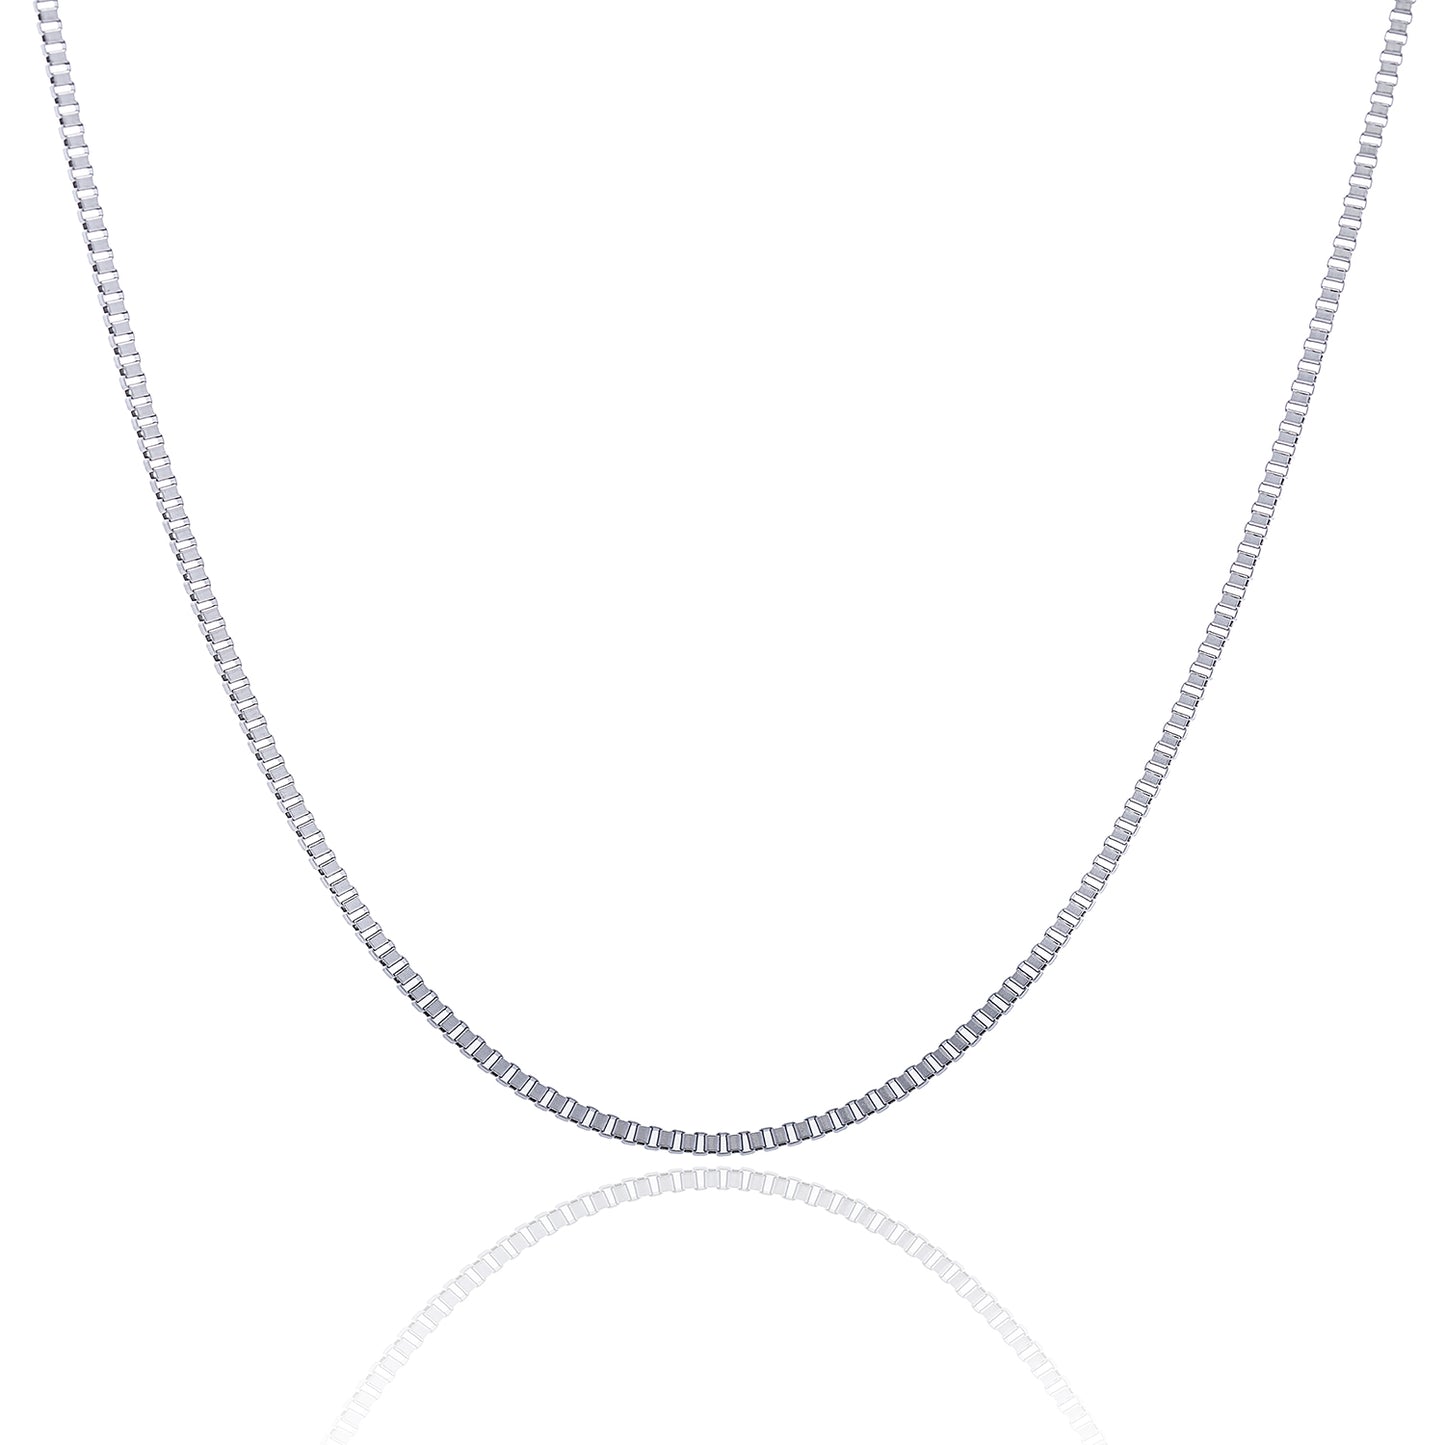 316L Stainless Steel 2.5MM Box Chain 16" - 36"